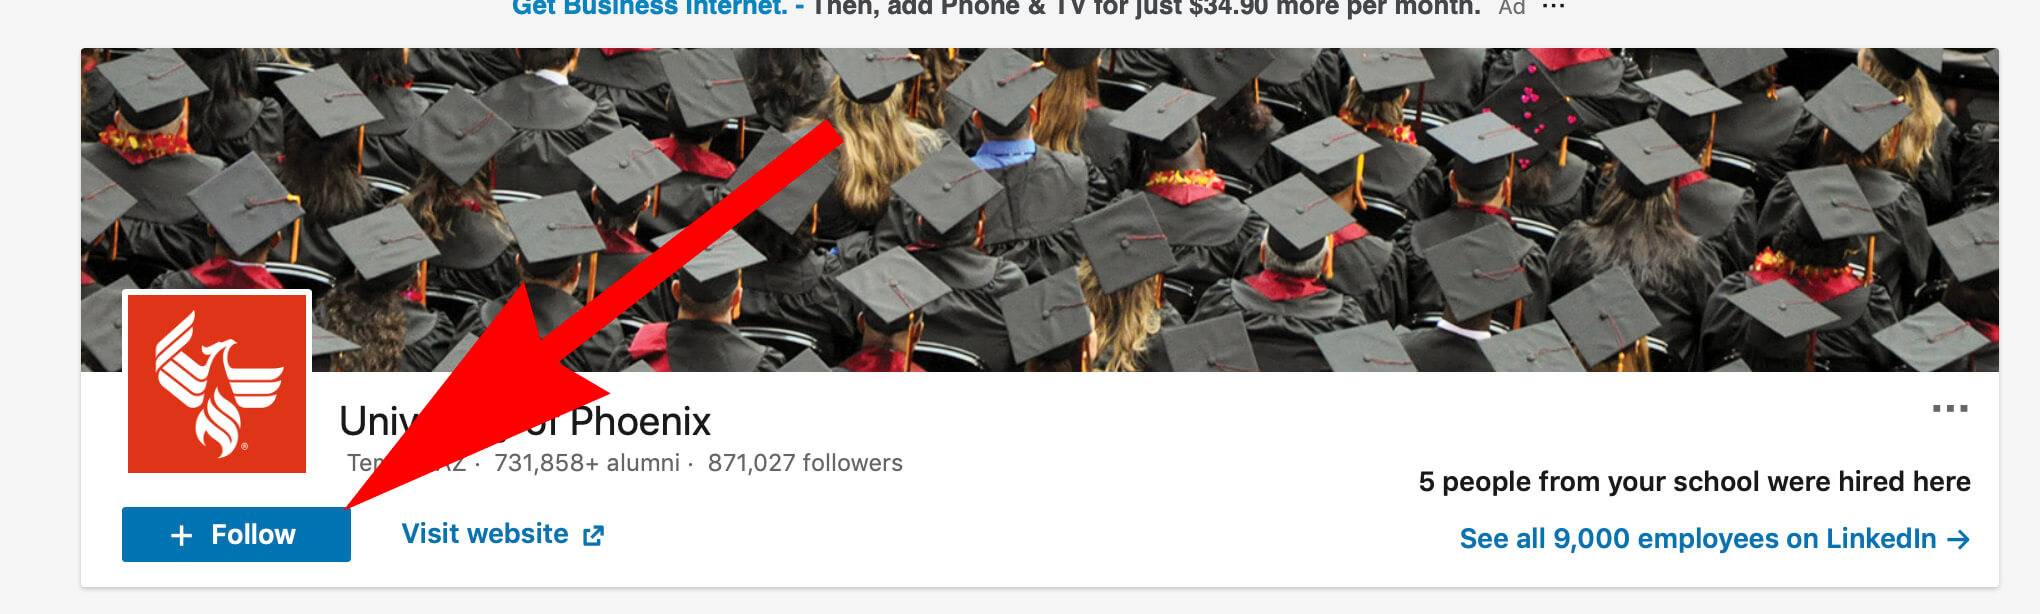 How to add interests on Linkedin - Following a university